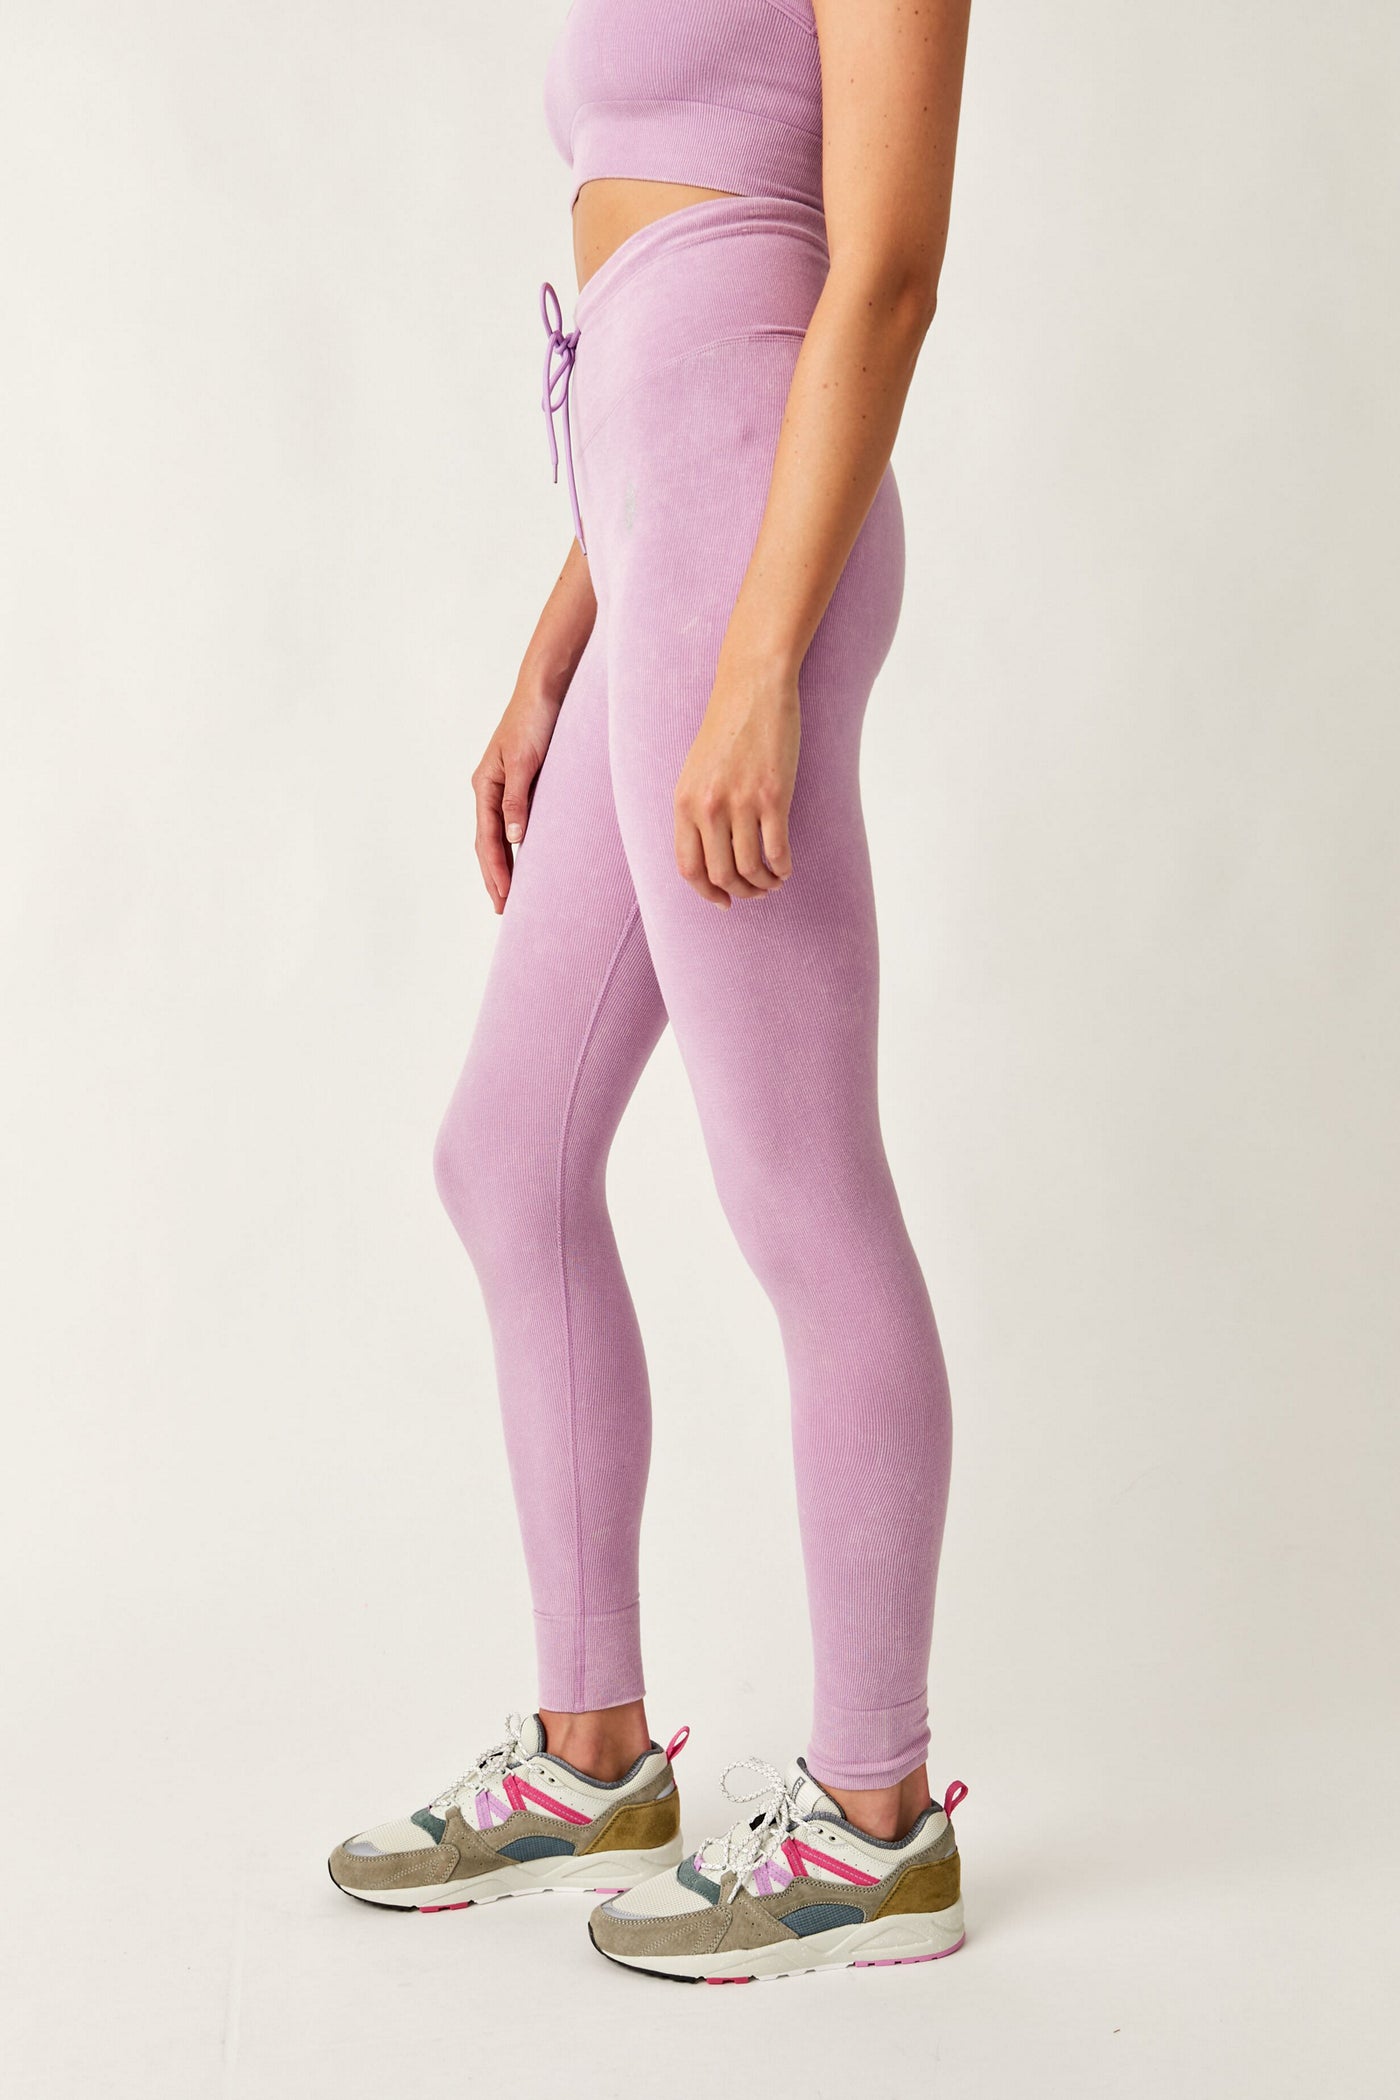 Free People Go To Legging - Chive Blossom